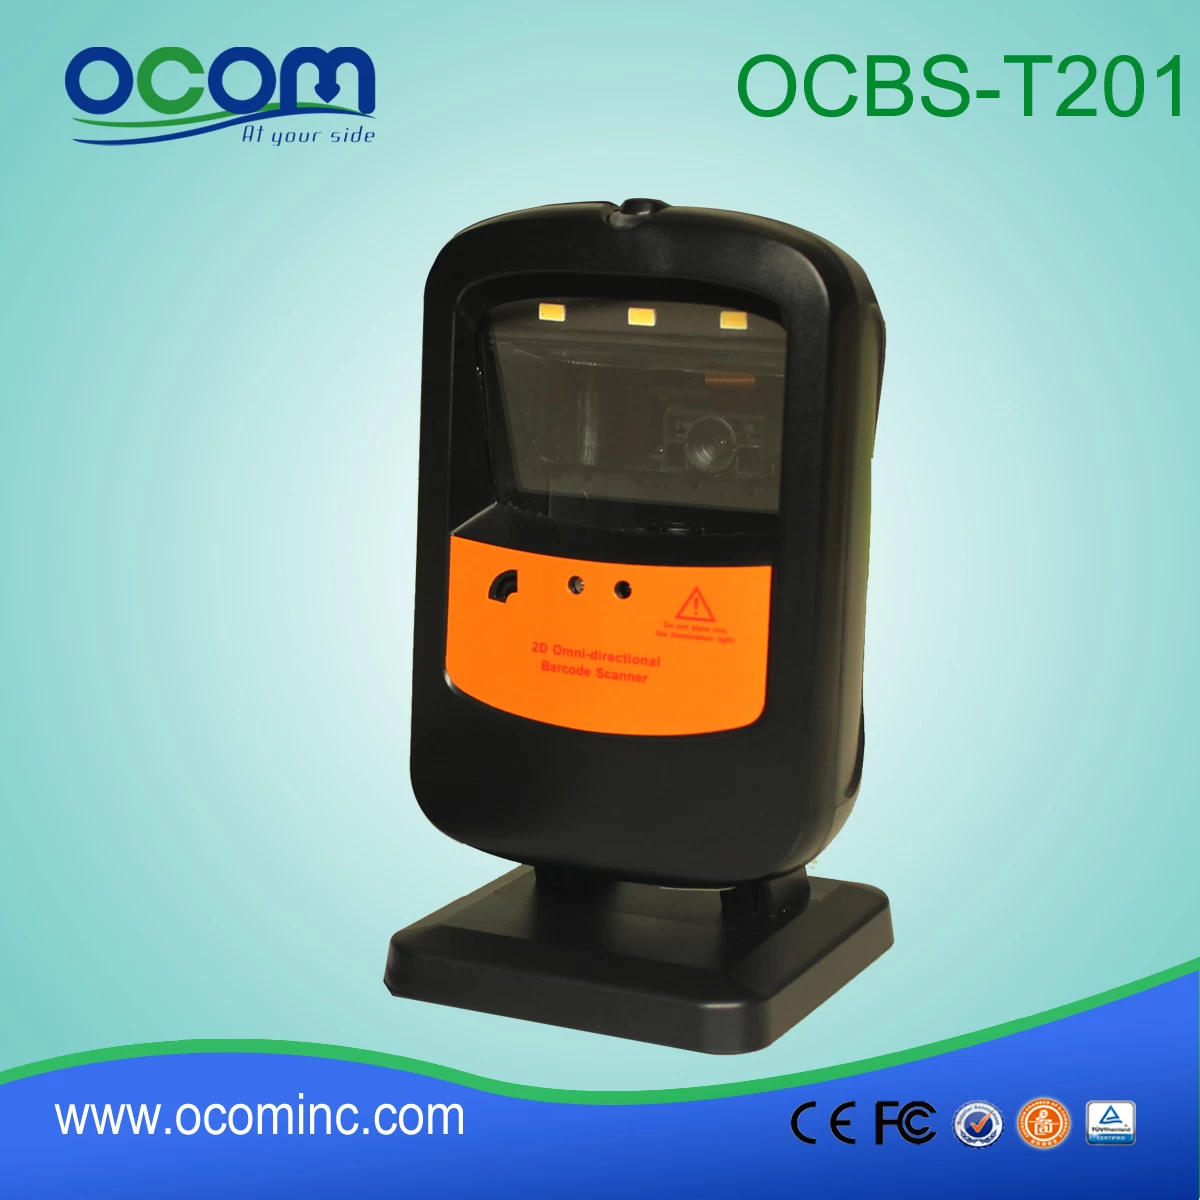 2d barcode scanner pdf417,read the image  (OCBS-T201)